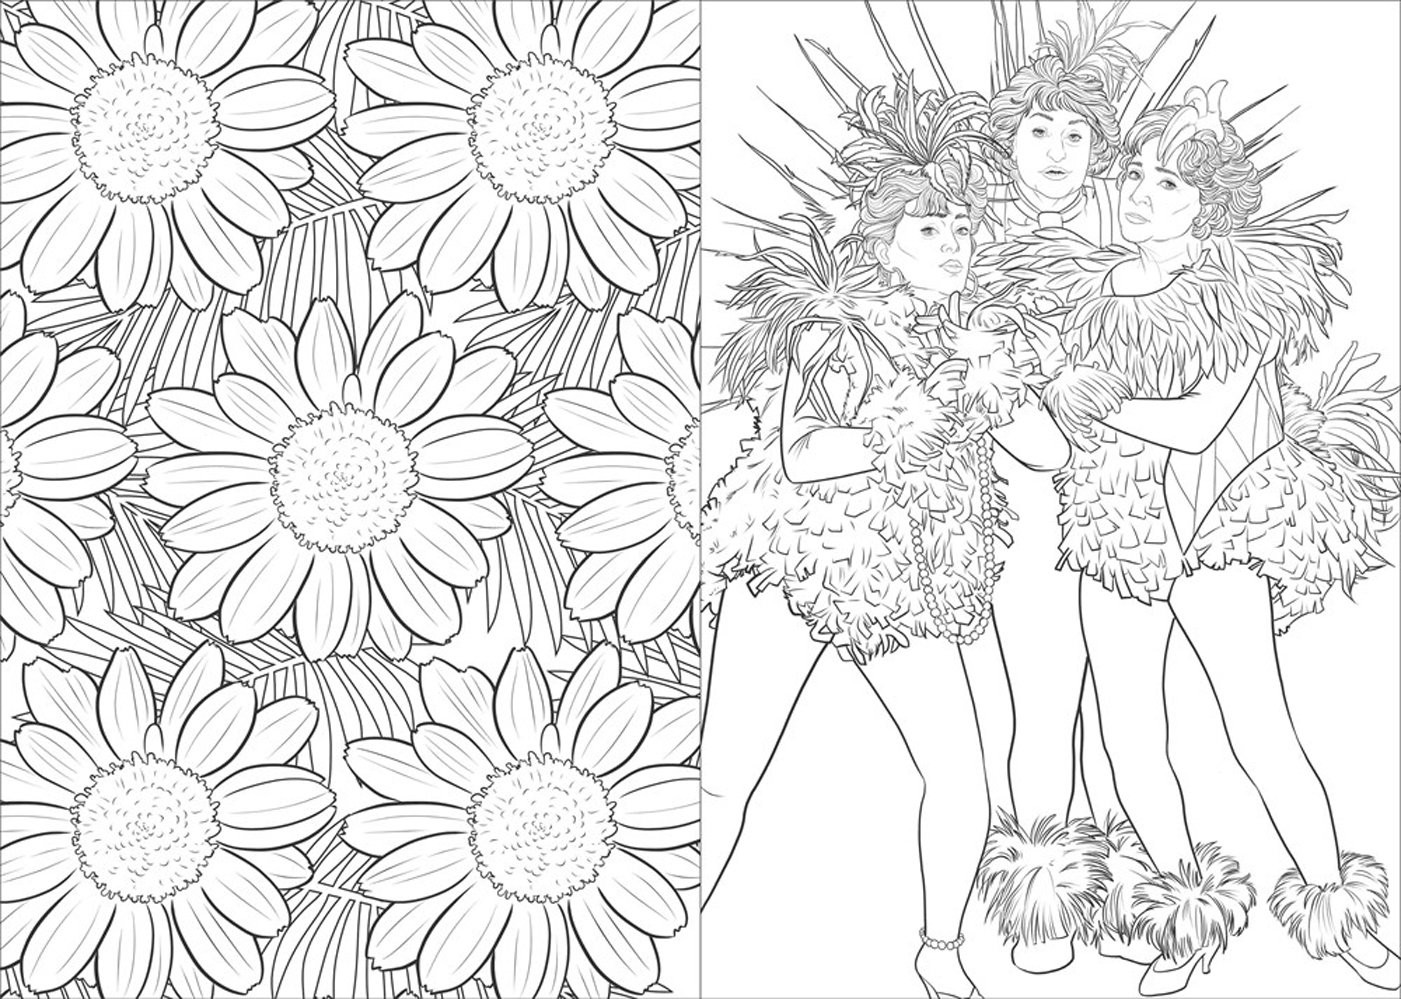 Golden Girls Coloring Pages
 The Golden Girls Now in Coloring Book Form